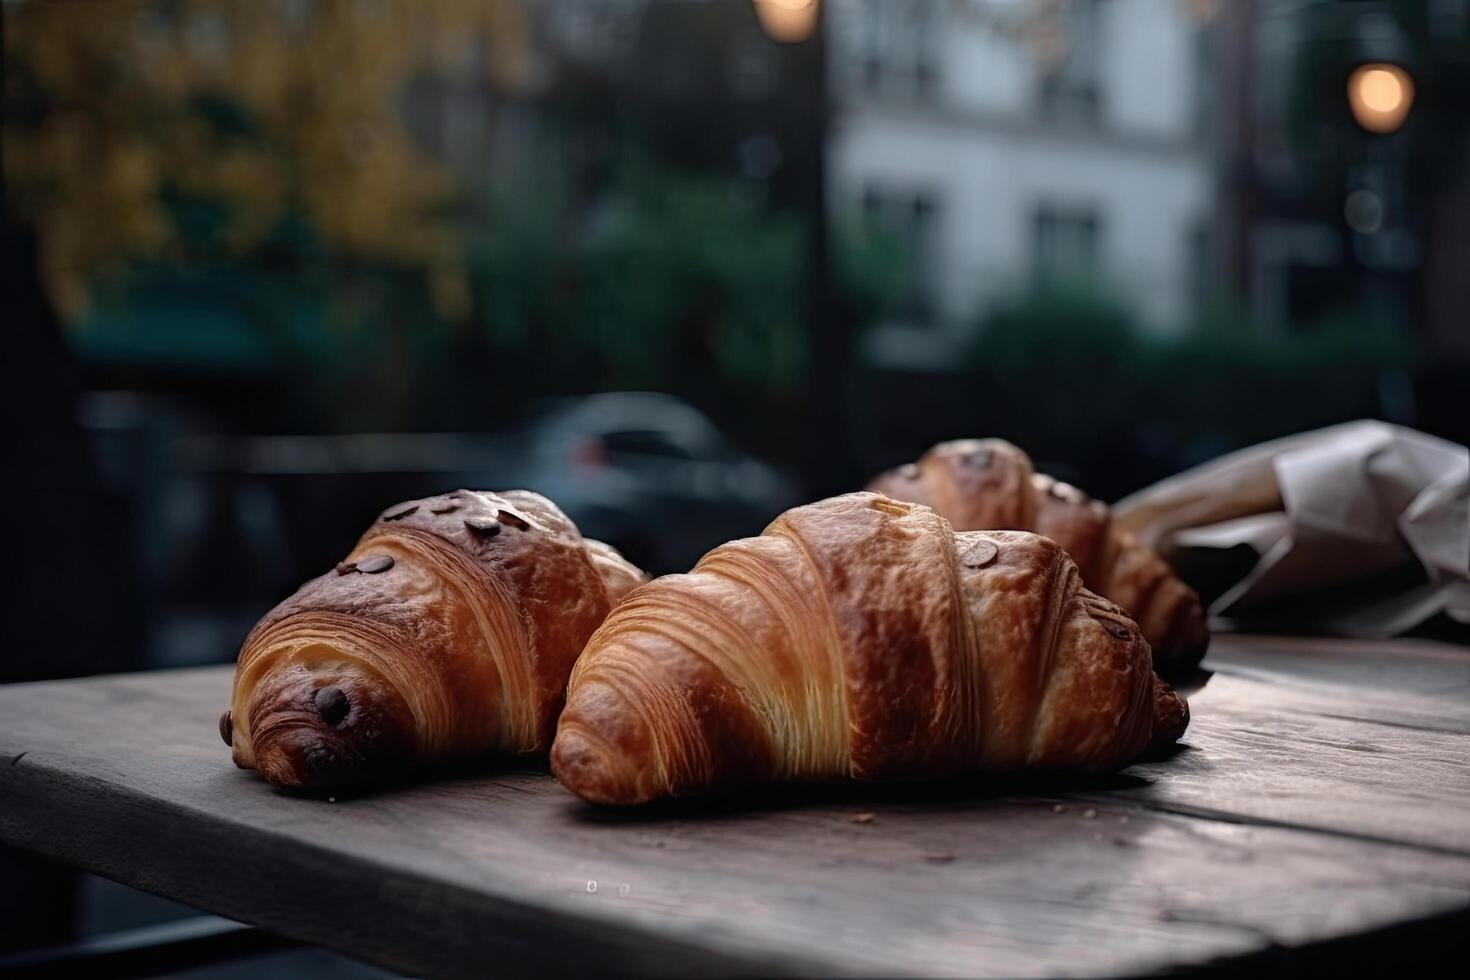 Freshly baked croissants on the table in a cafe. Delicious French croissants with coffee on a wooden table, photo